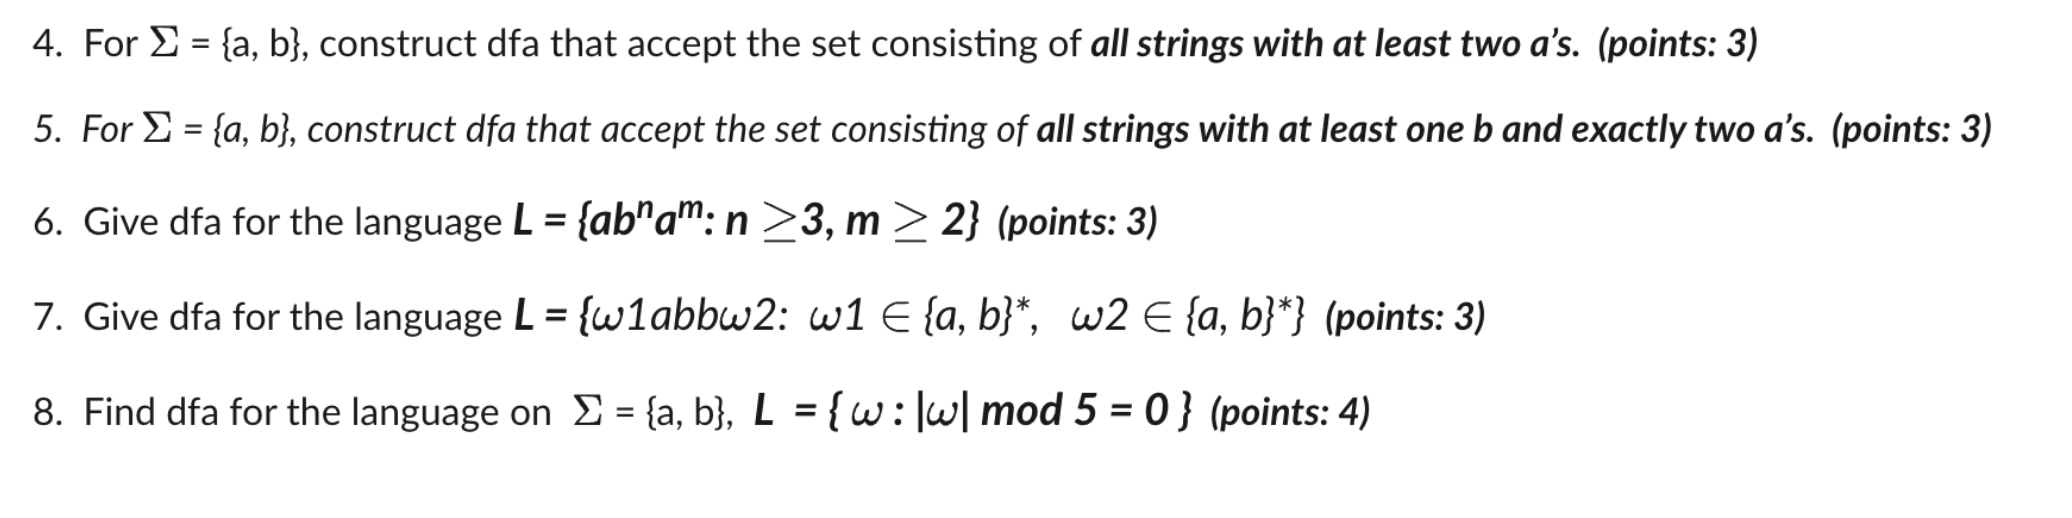 4. For = {a, b}, construct dfa that accept the set consisting of all strings with at least two a's. (points: